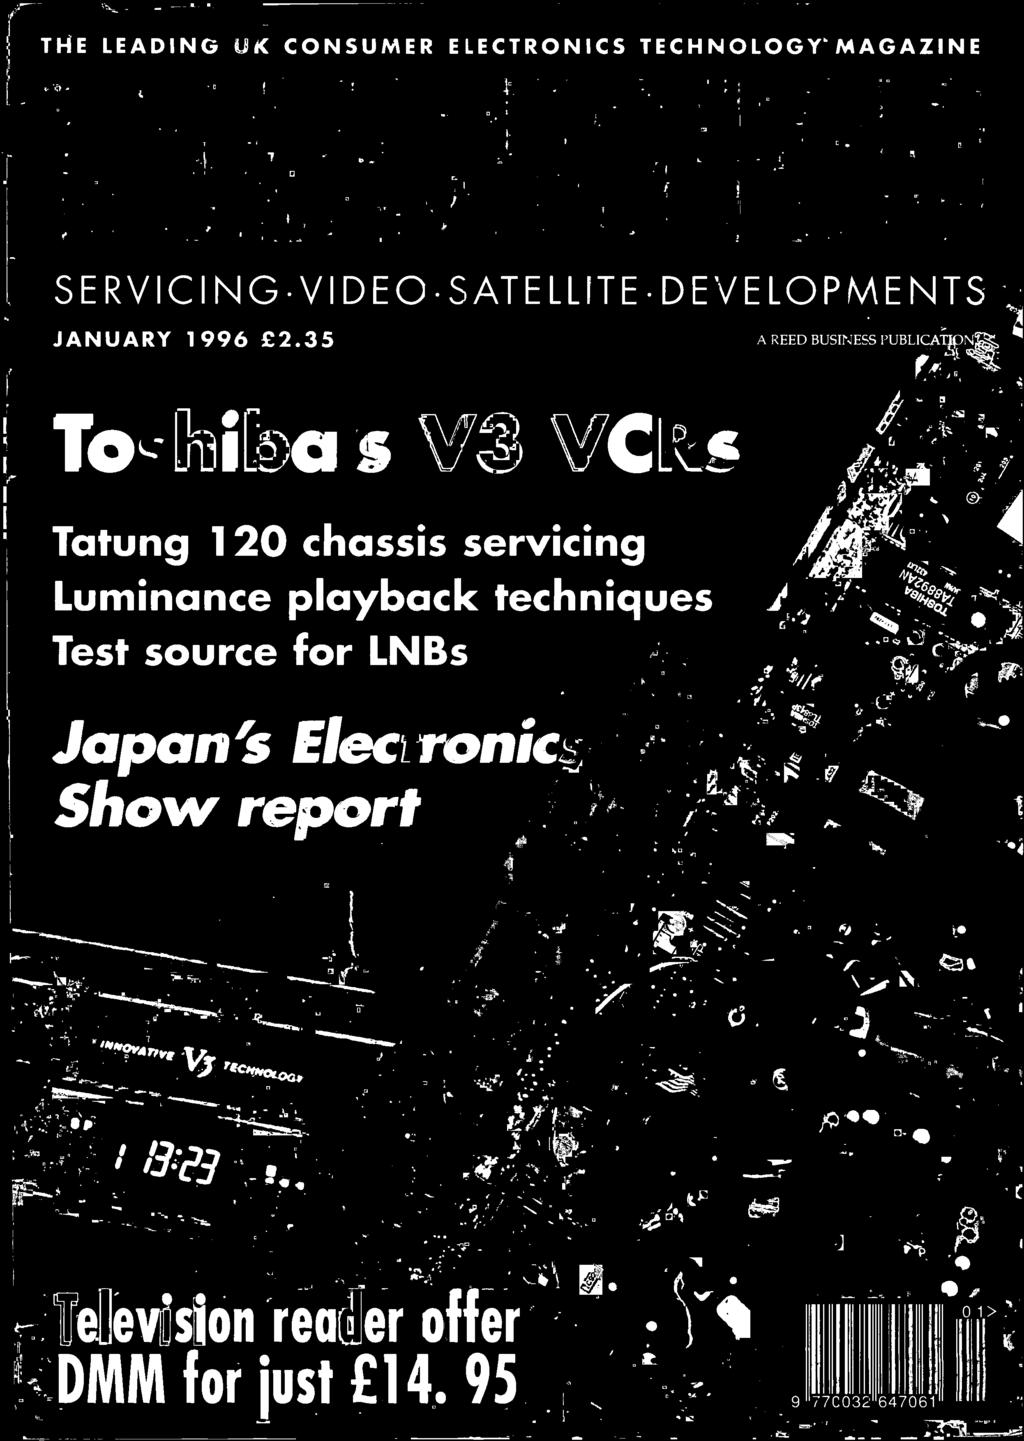 #t L:a is V3 VC Tatung 120 chassis servicing